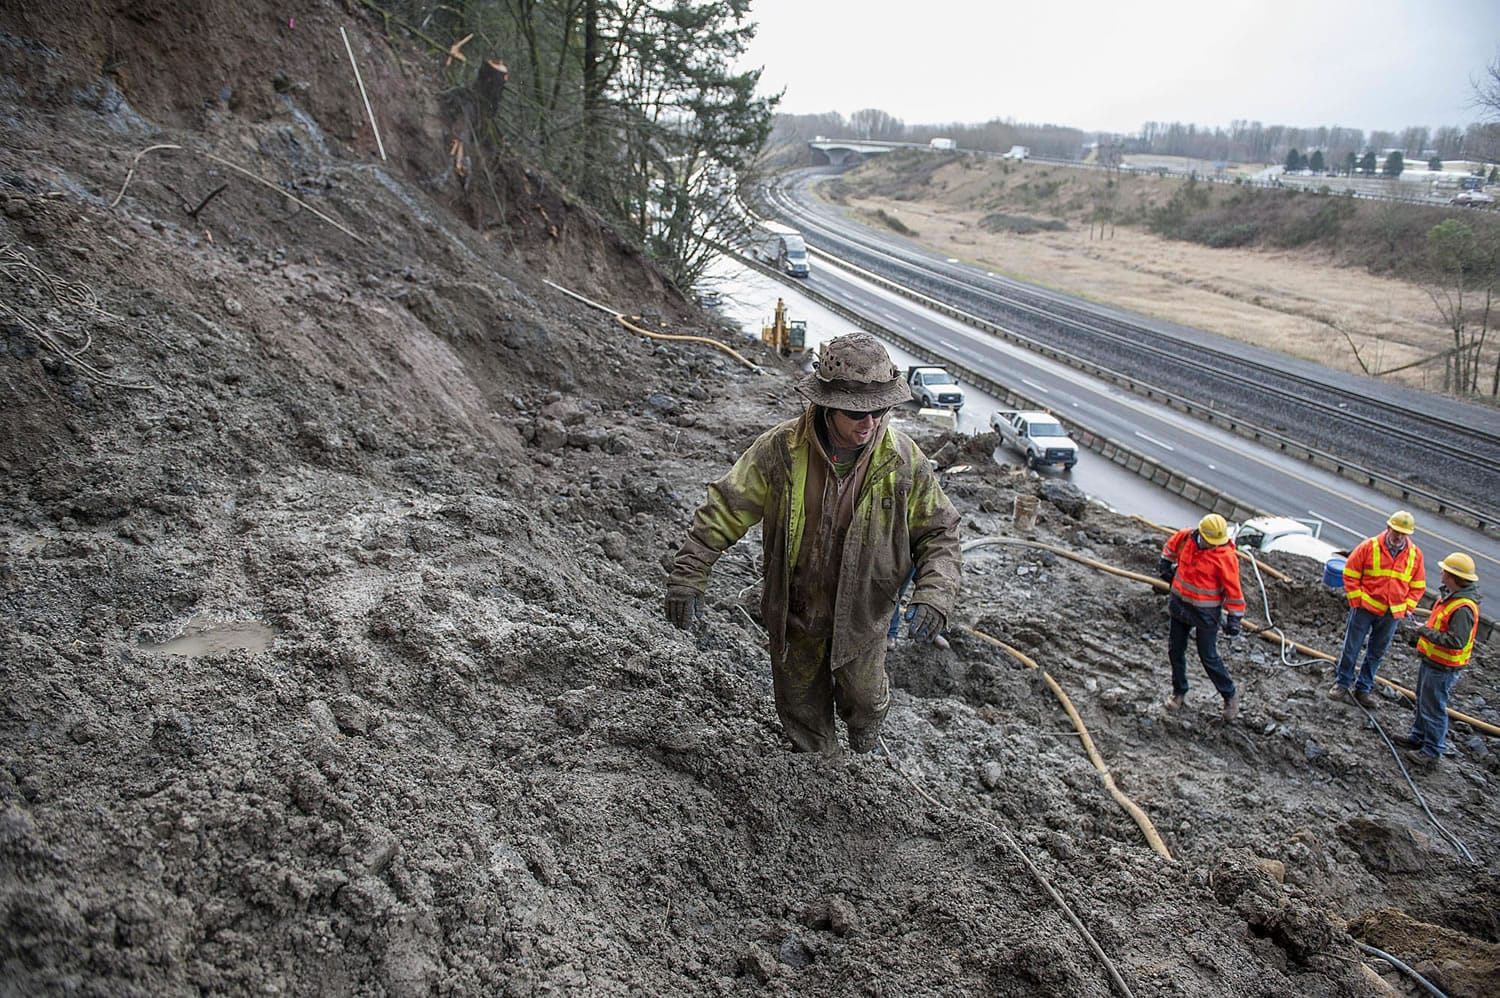 Jon Simpson of Access Limited Construction navigates through thick mud while working along the side of Interstate 5 on Friday morning near Woodland.